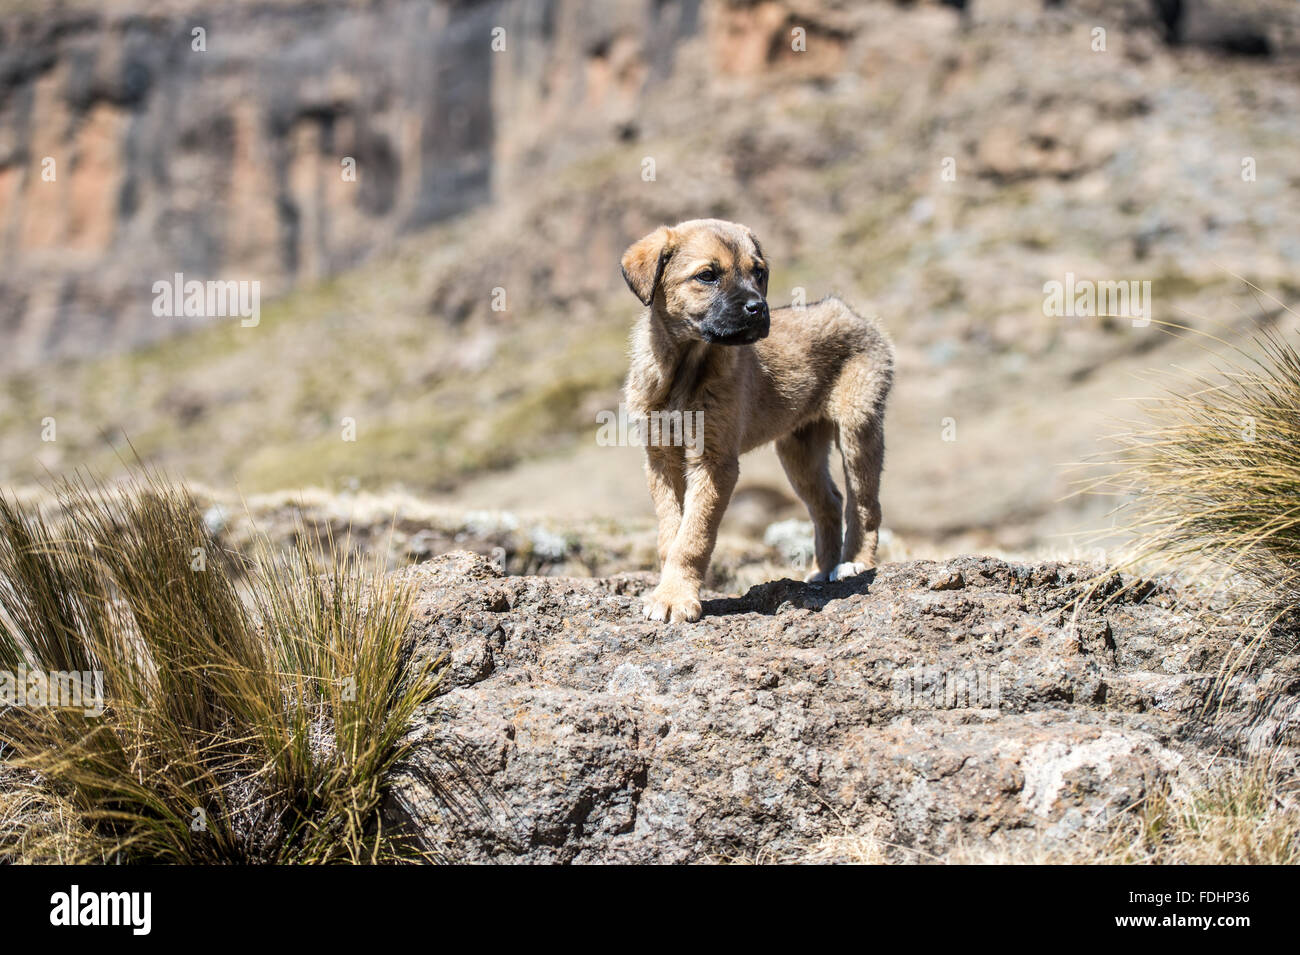 A local shepherd's puppy standing on the rocky terrain of the mountains in Lesotho, Africa Stock Photo